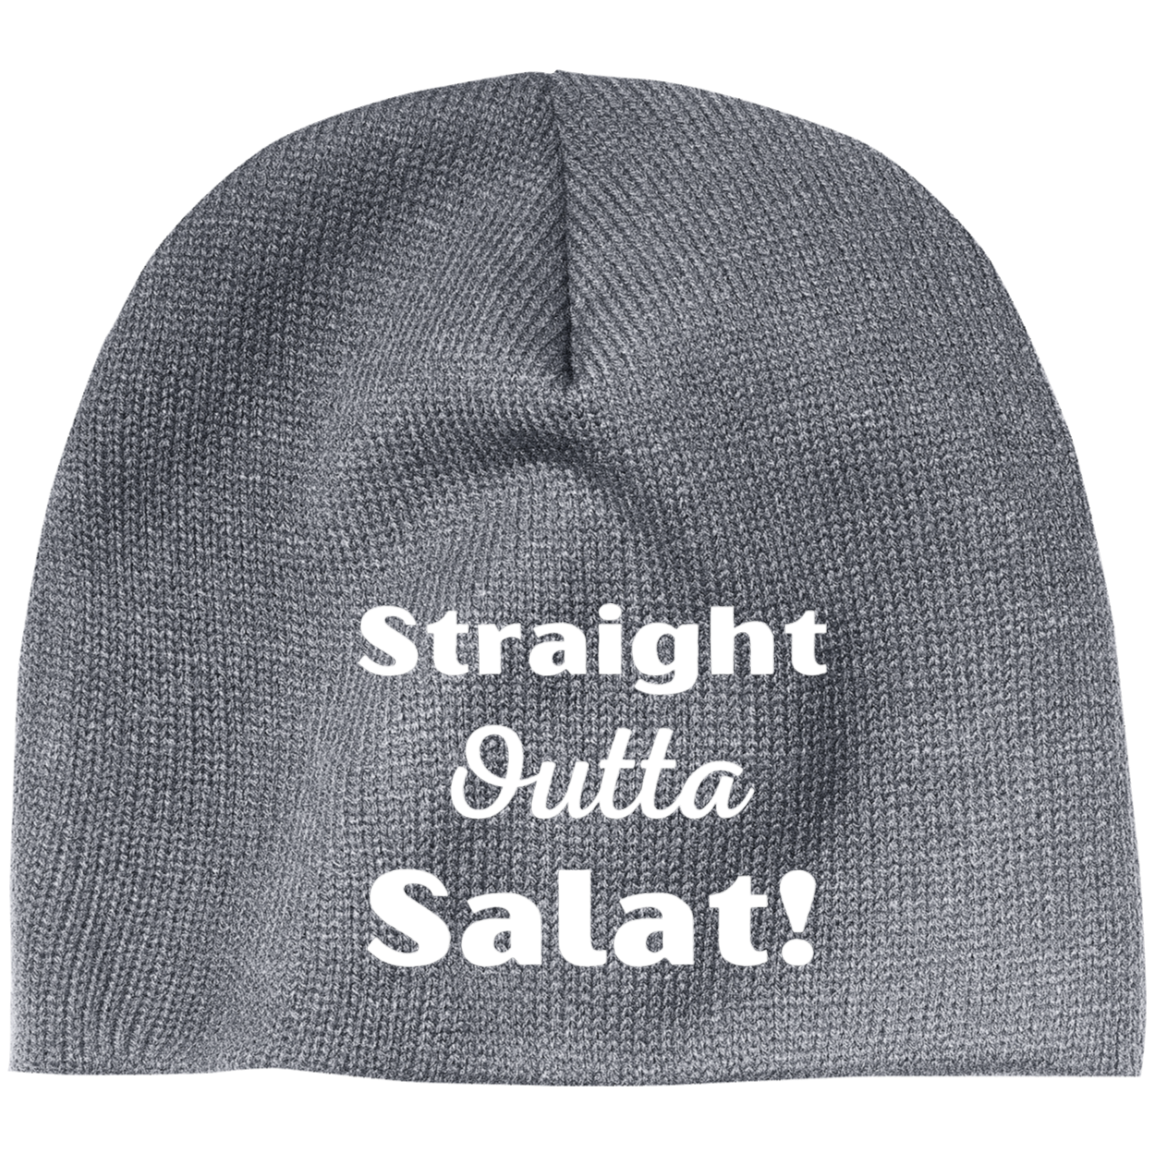 STRAIGHT OUTTA SALAT! Embroidered 100% Acrylic Beanie ( More Colors Options )